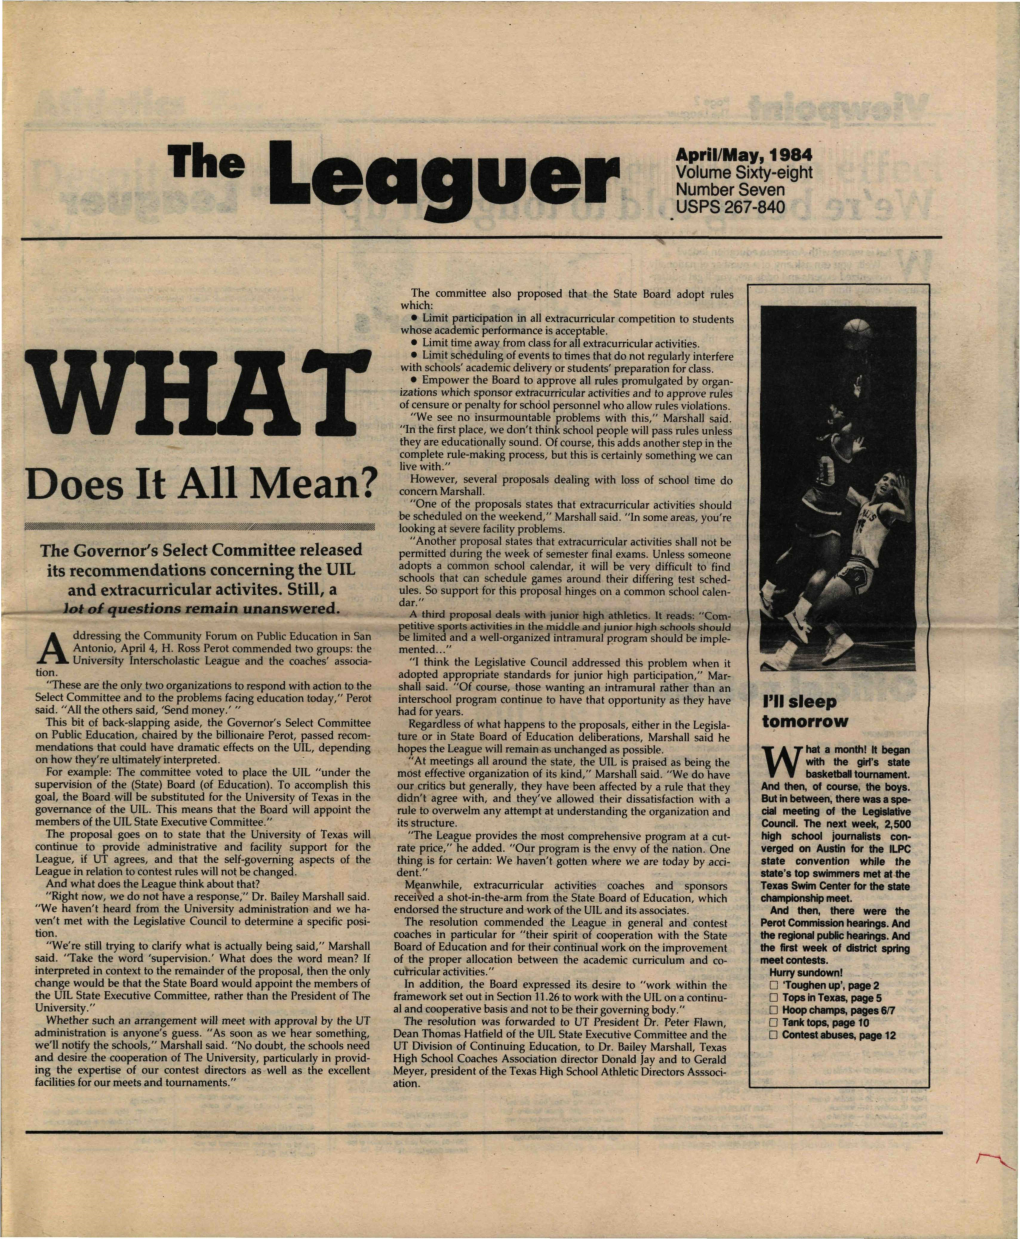 The Leaguer, April/May 1984